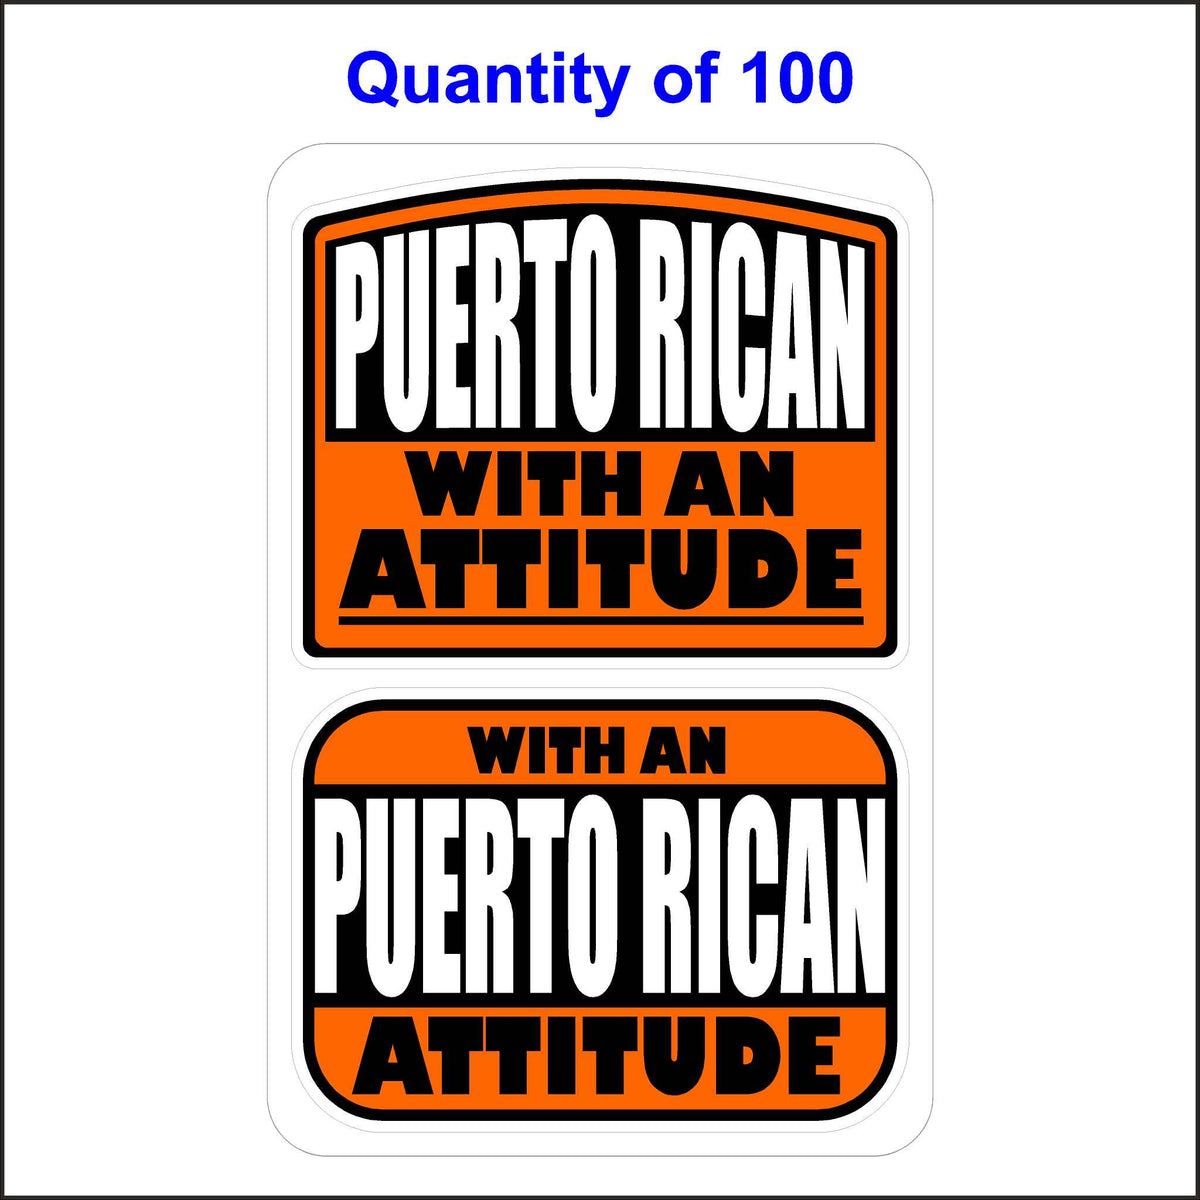 Puerto Rican With an Attitude Stickers 100 Quantity.